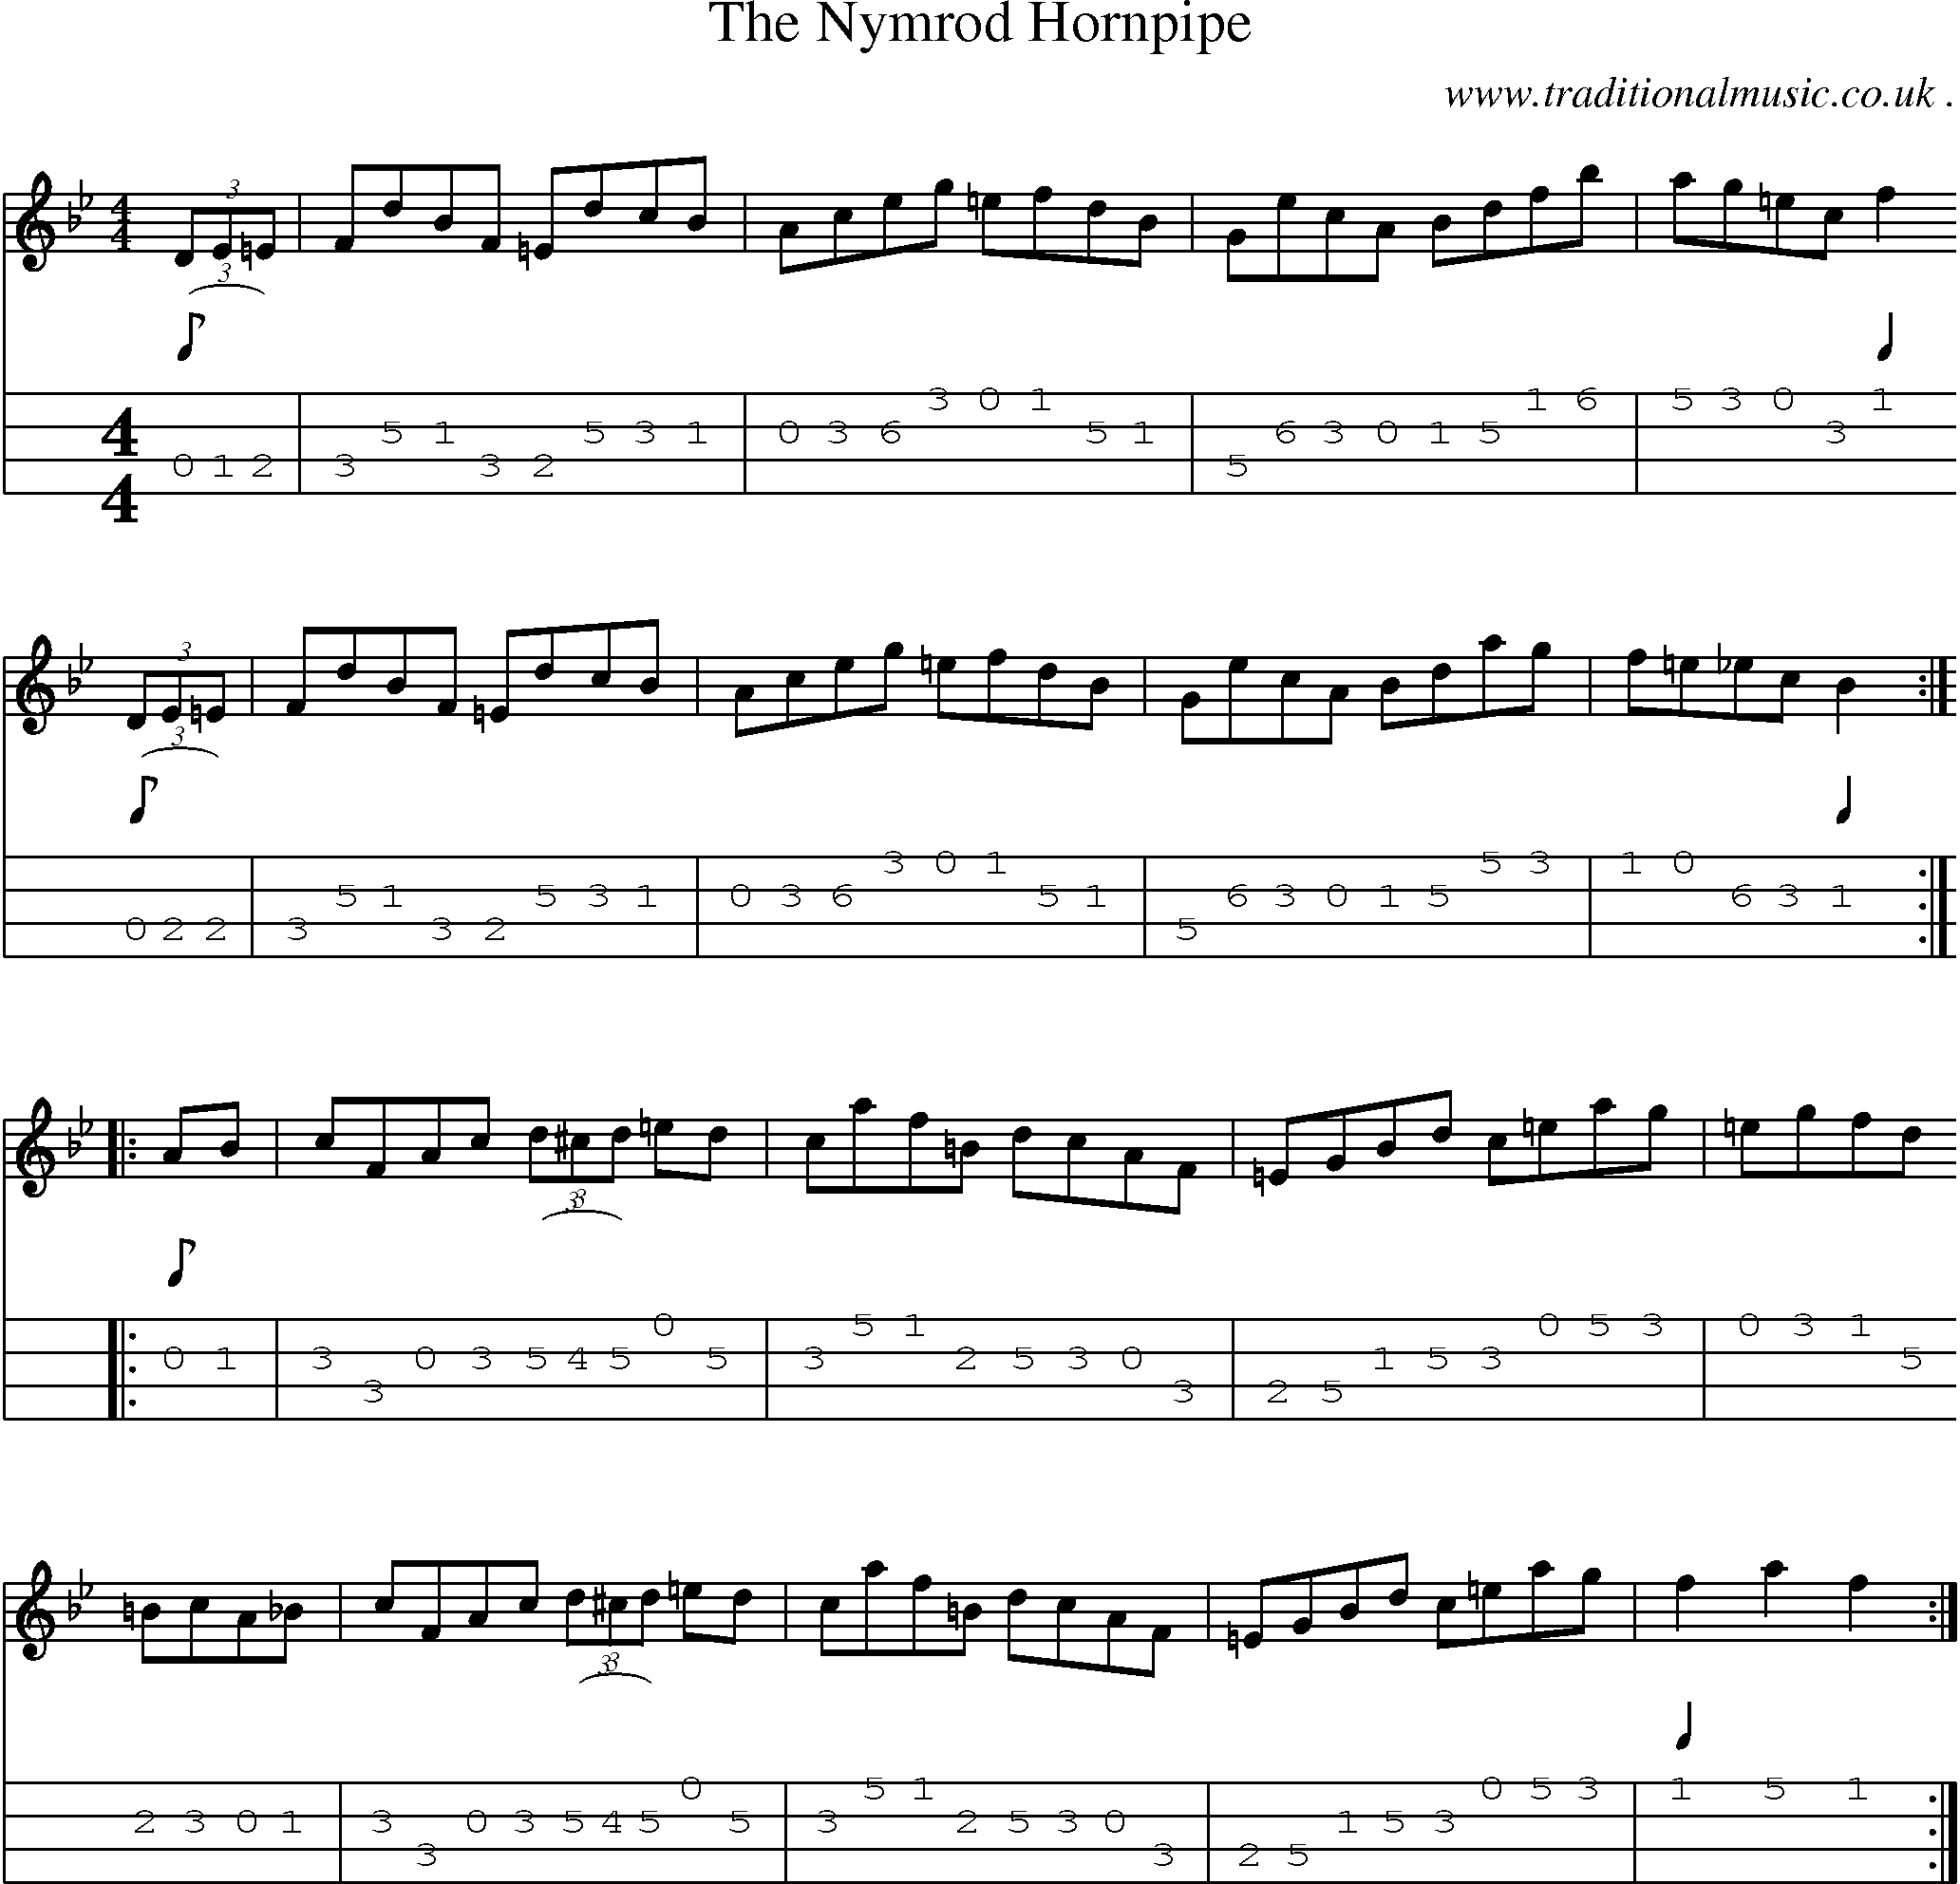 Sheet-Music and Mandolin Tabs for The Nymrod Hornpipe